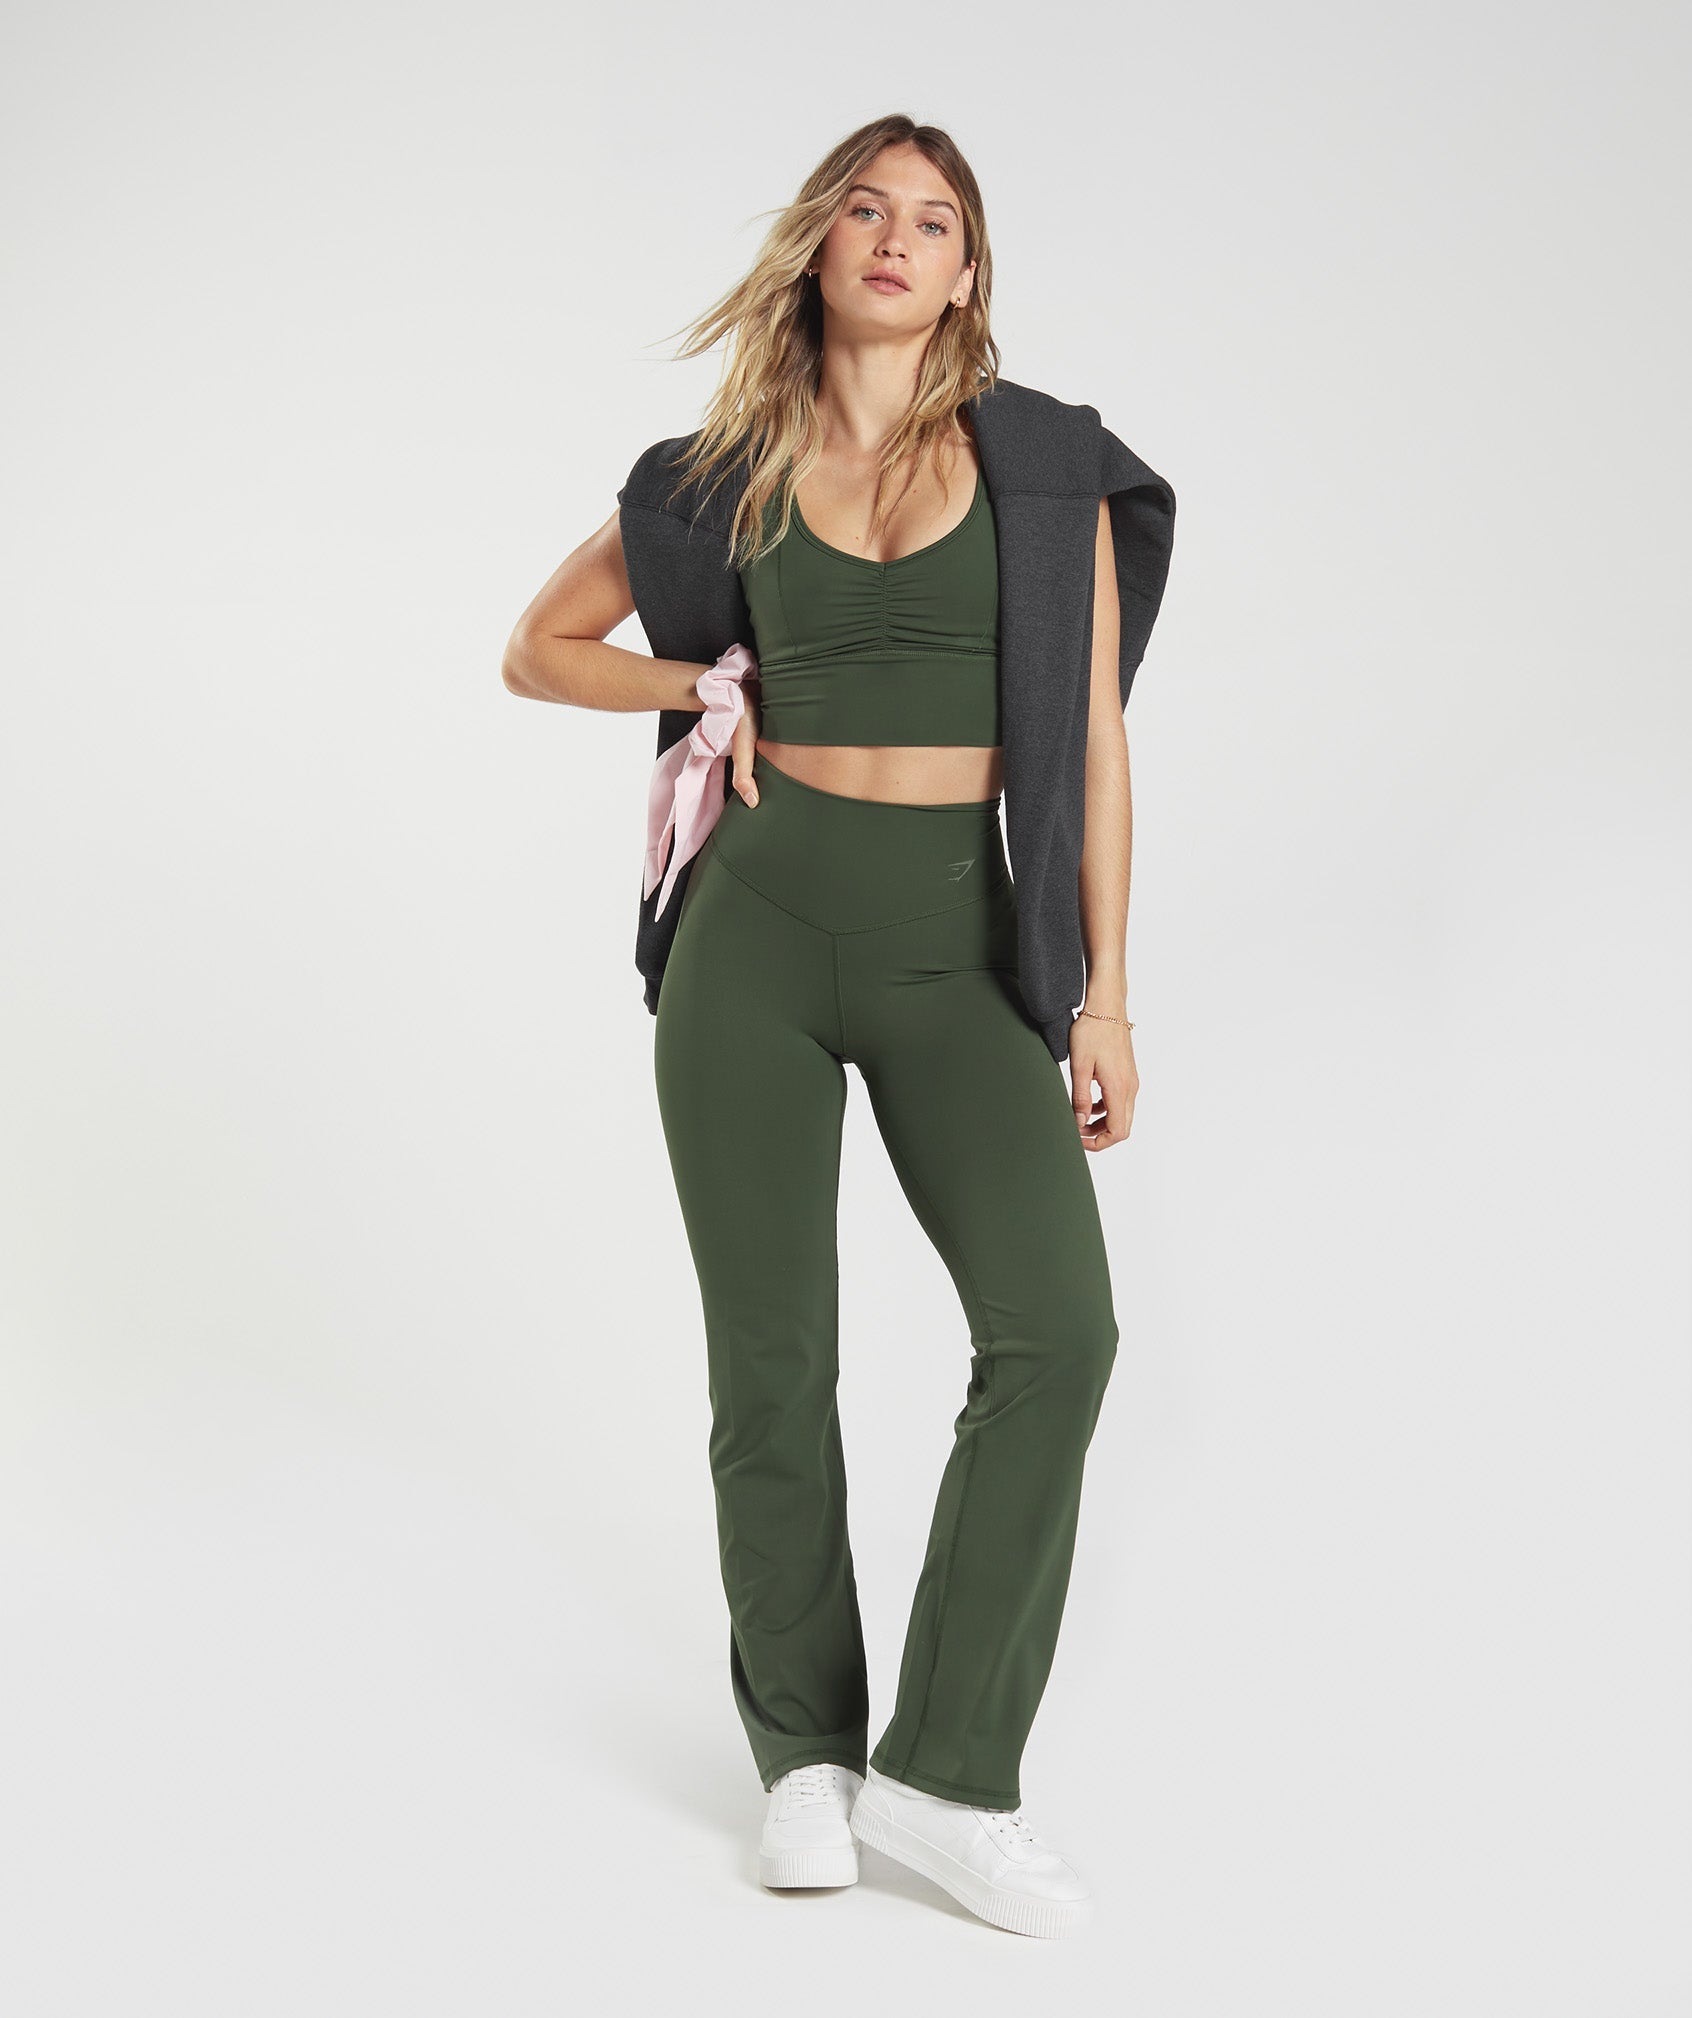 Elevate Flared Leggings in Moss Olive - view 5